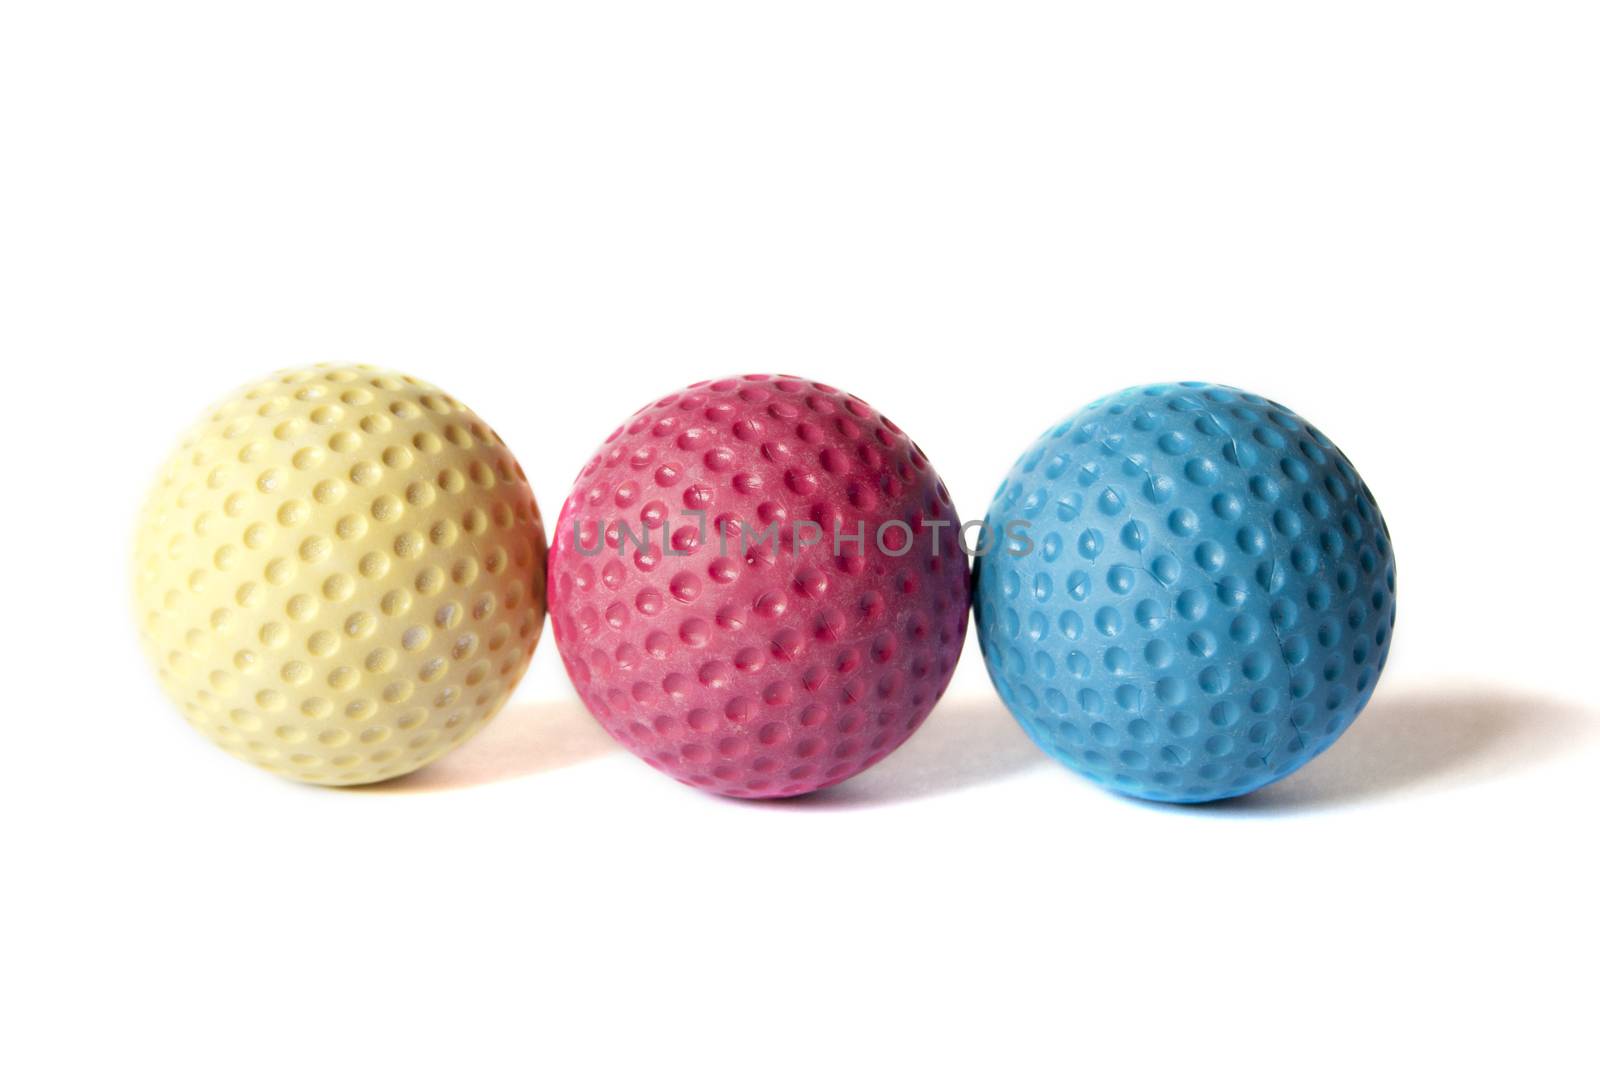 Yellow, Red and Blue colored Mini Golf balls on an isolated background